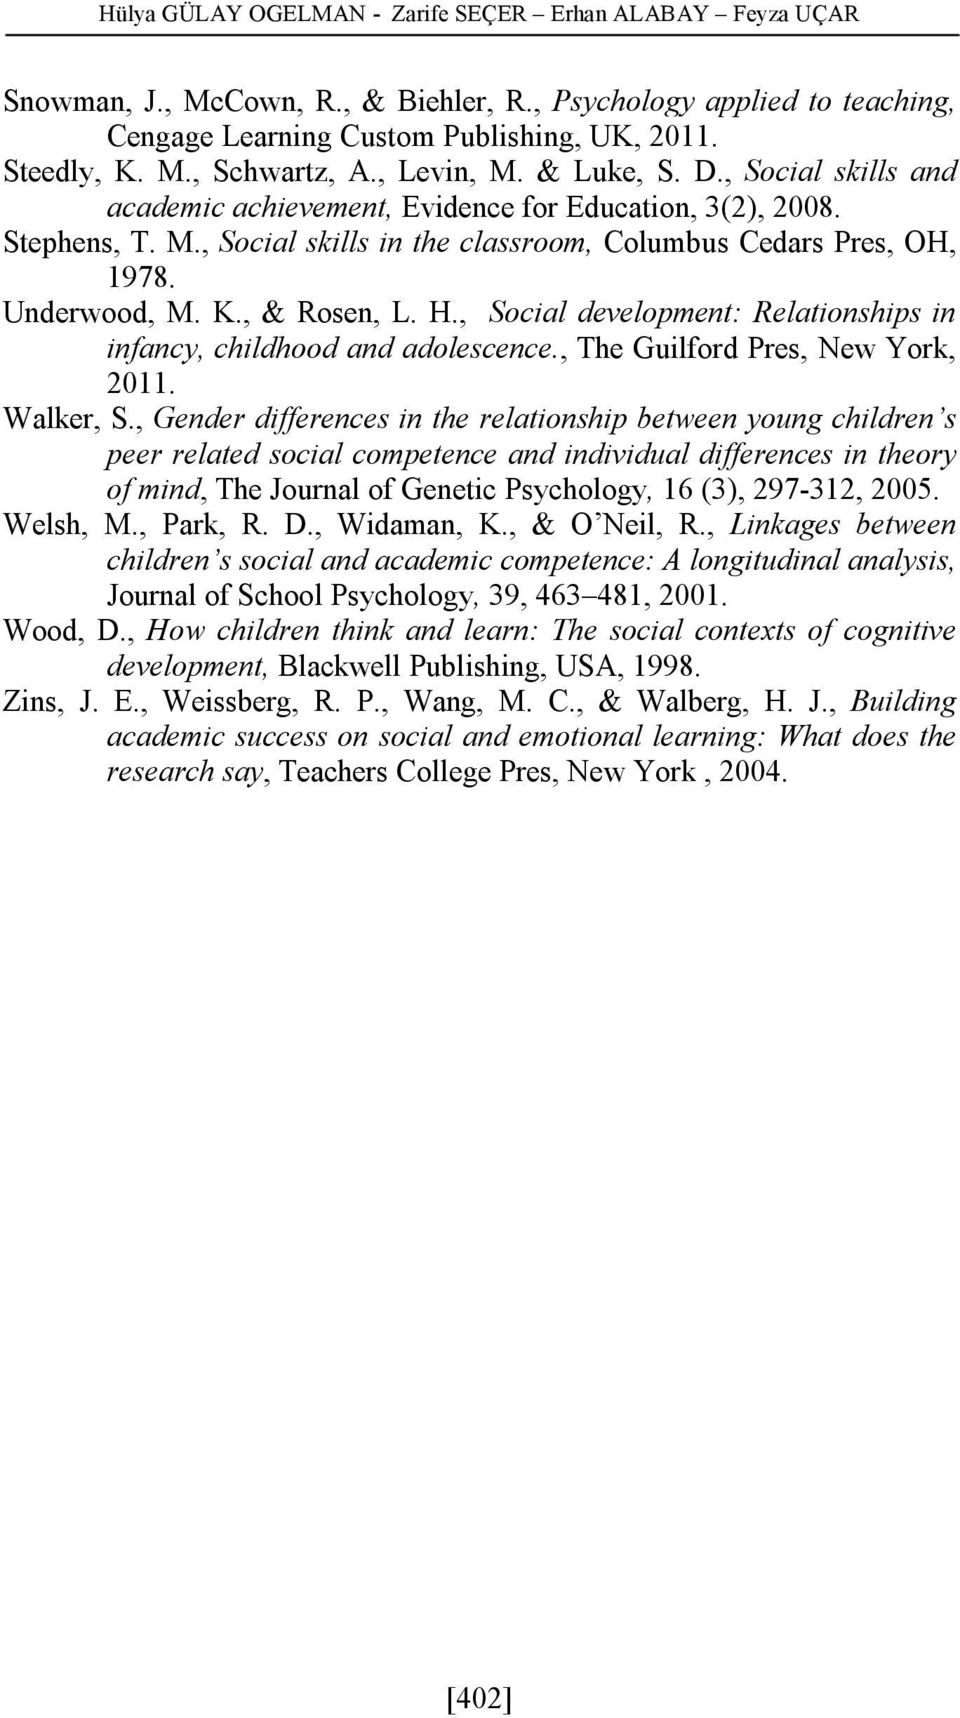 , & Rosen, L. H., Social development: Relationships in infancy, childhood and adolescence., The Guilford Pres, New York, 20. Walker, S.